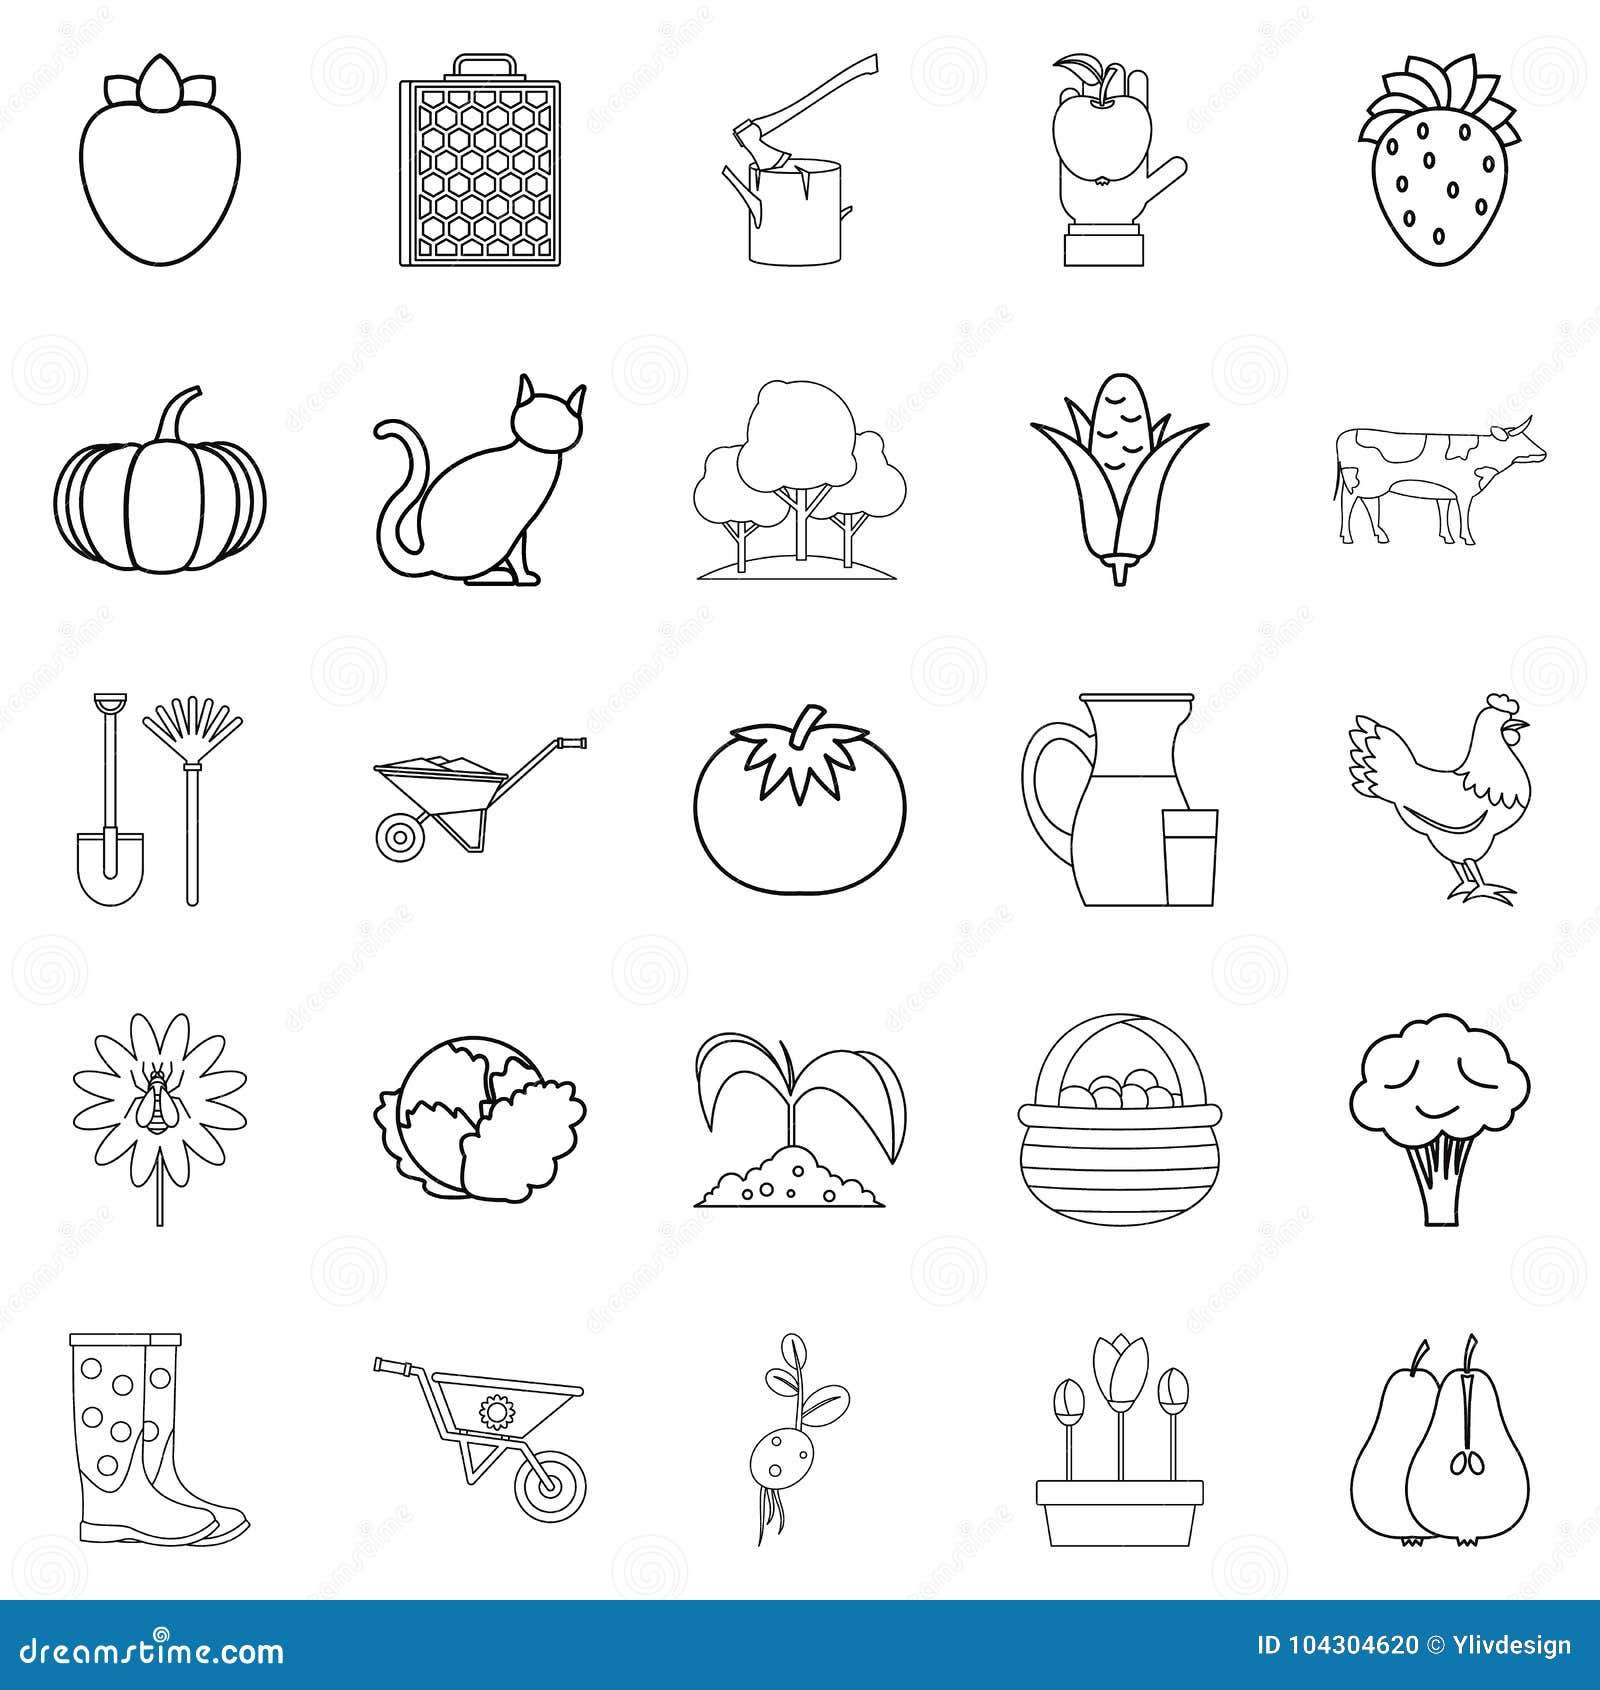 agriculturalist icons set, outline style